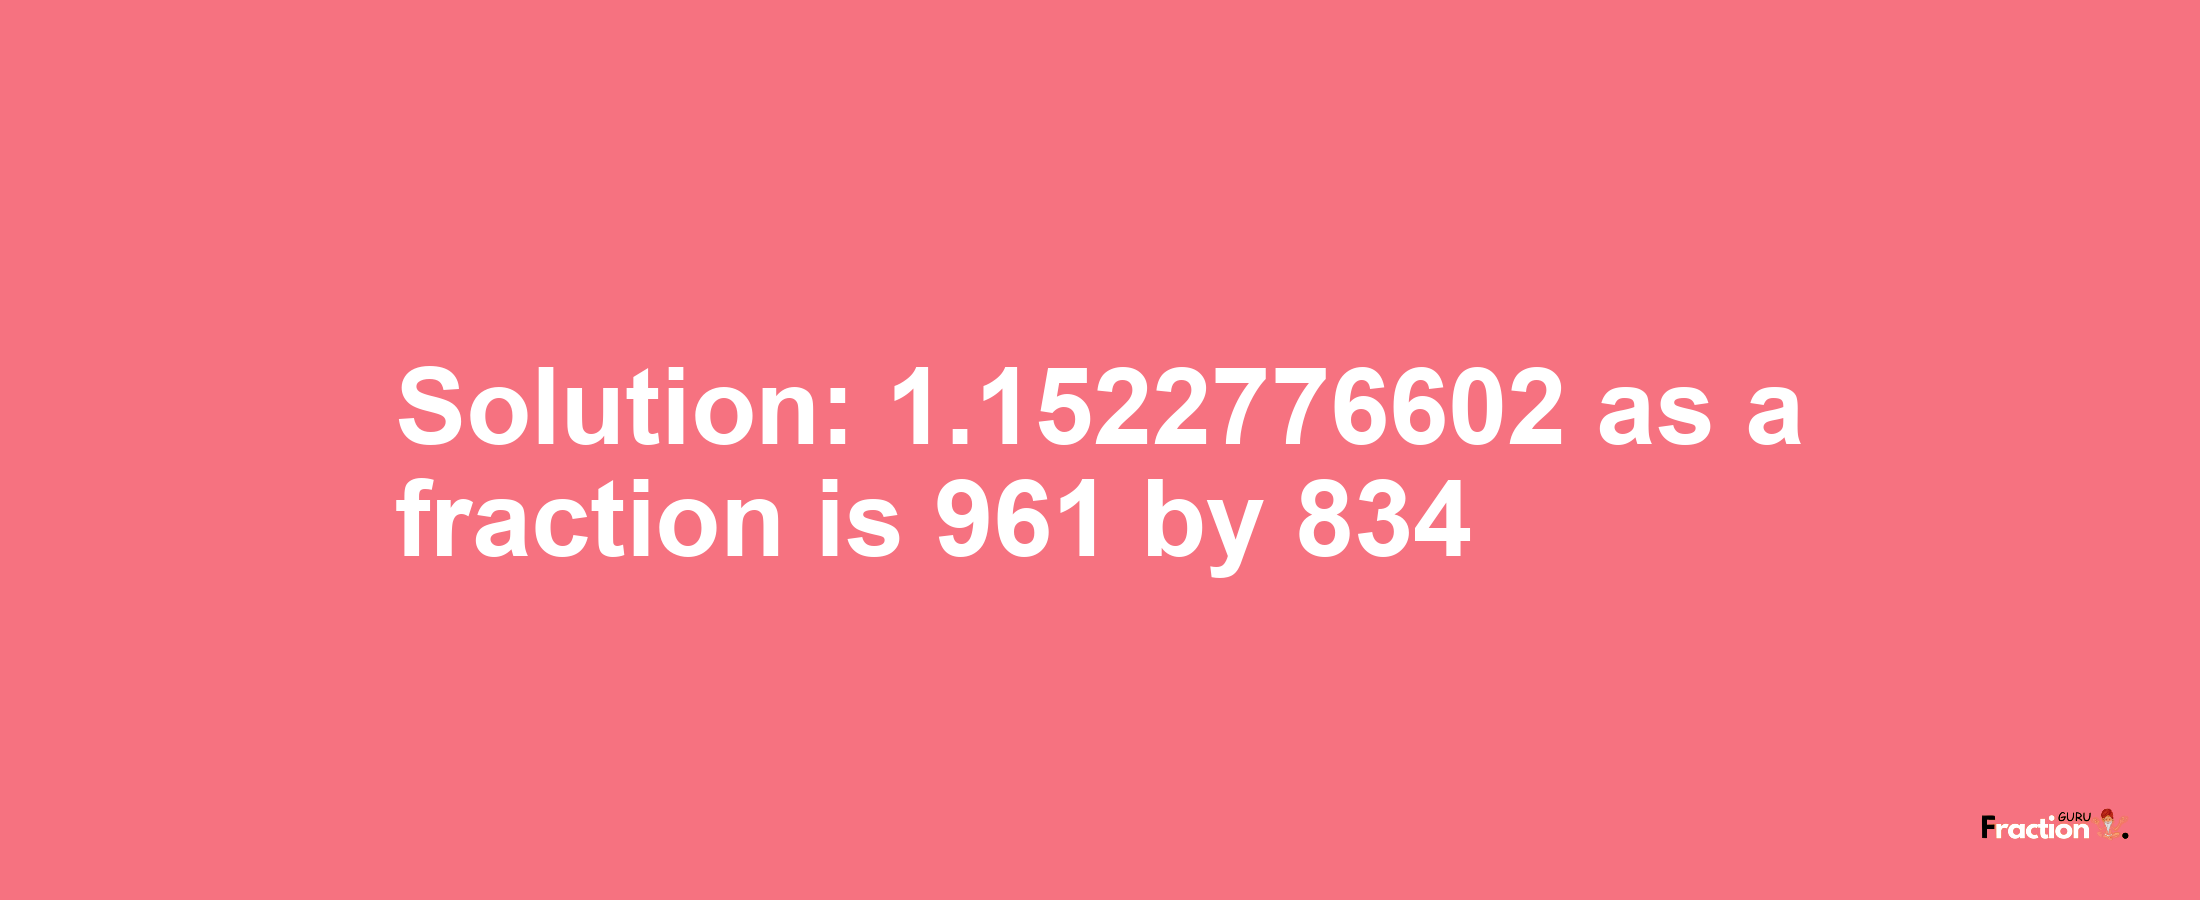 Solution:1.1522776602 as a fraction is 961/834